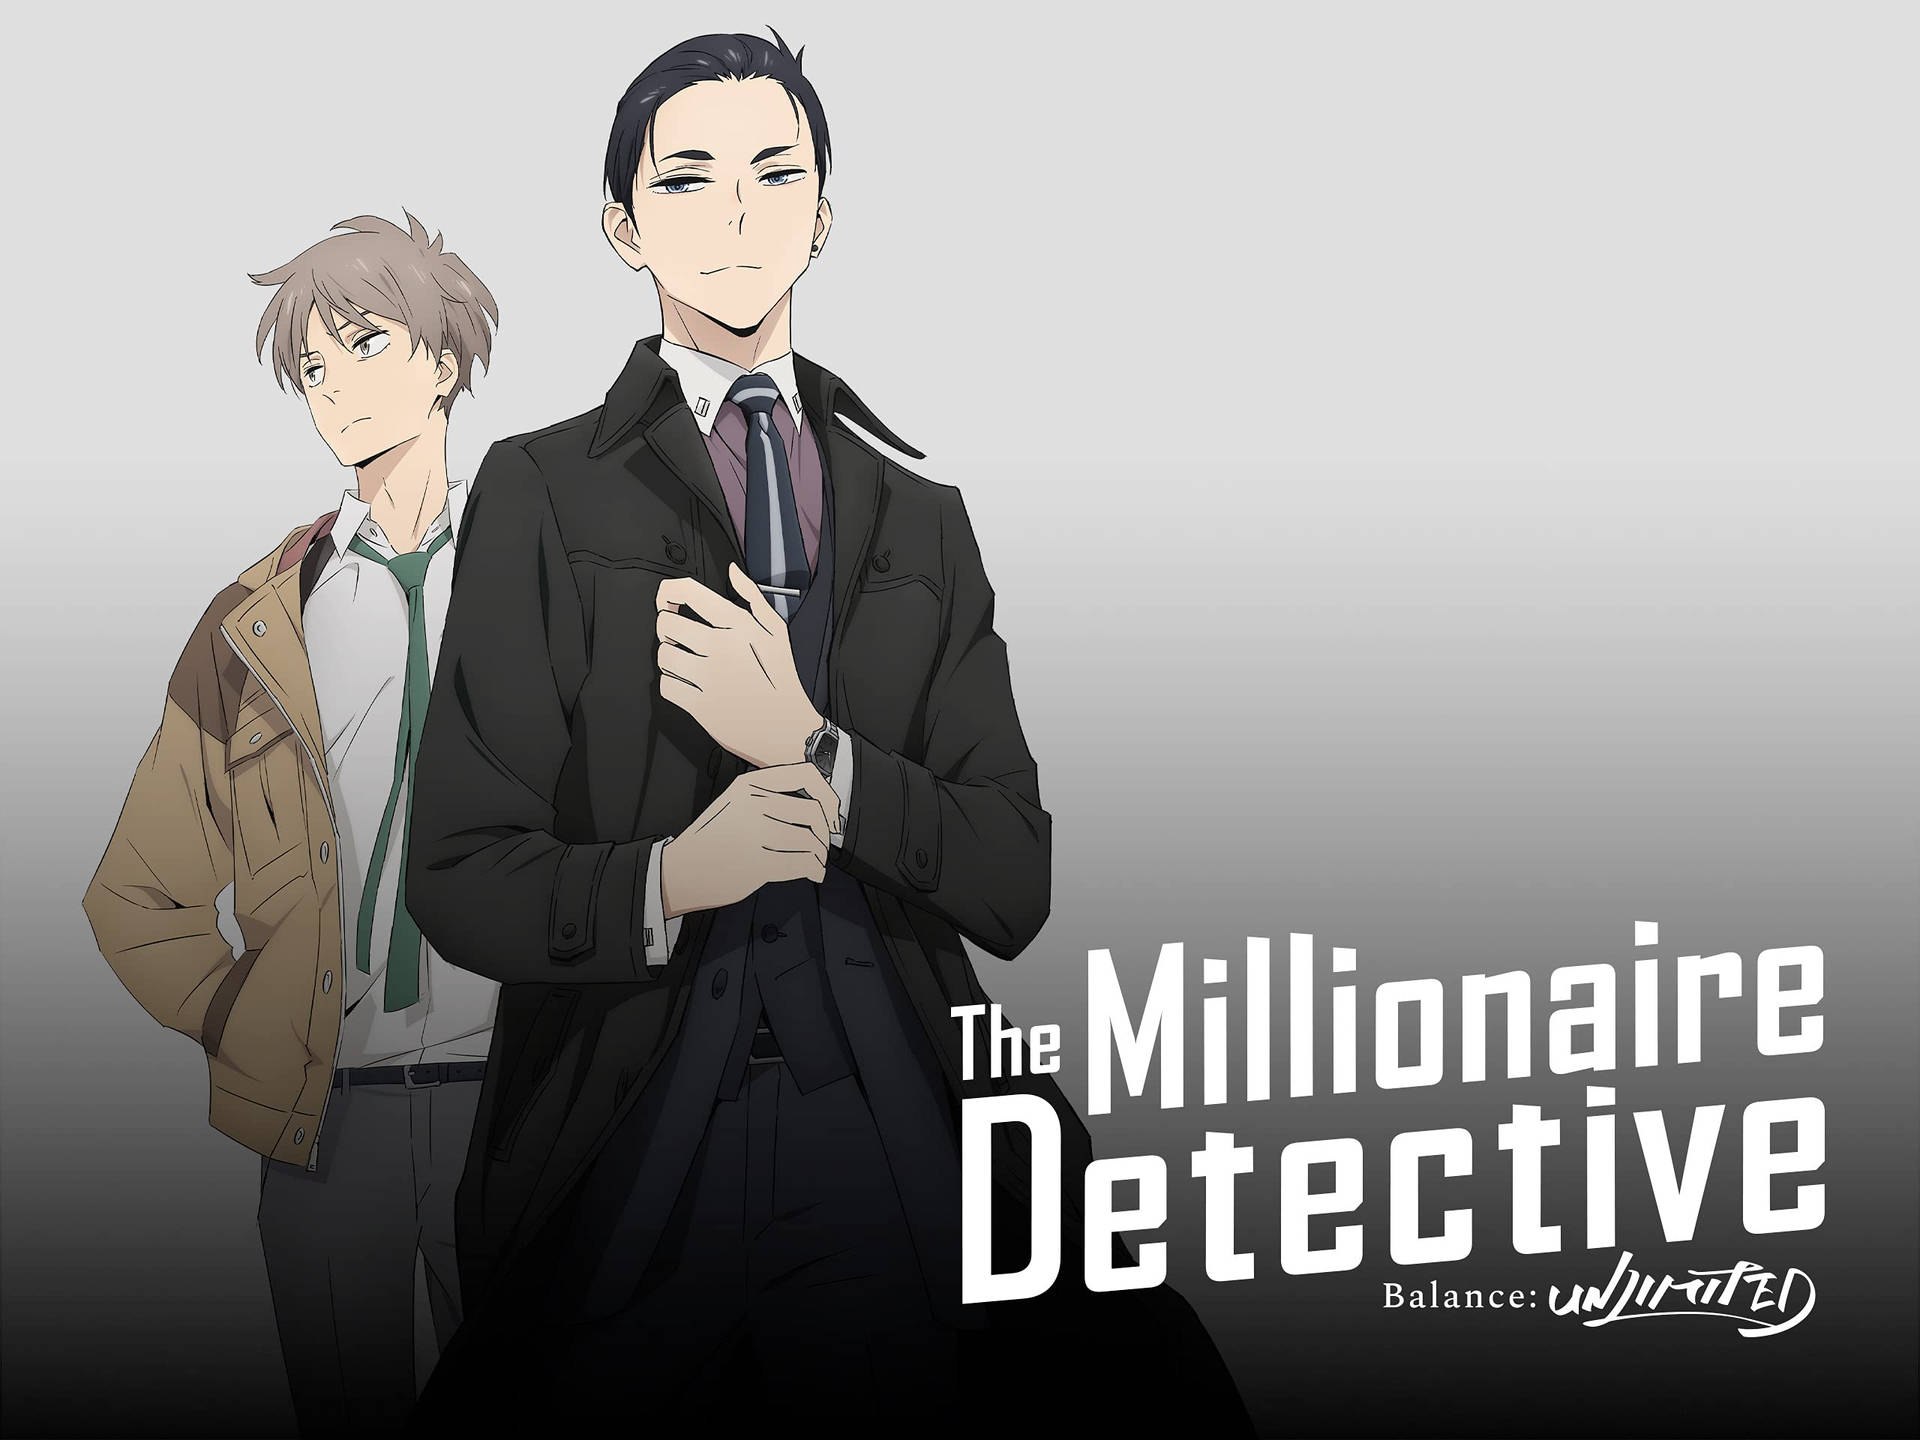 The Millionaire Detective Balance: Unlimited - Intriguing Anime Series